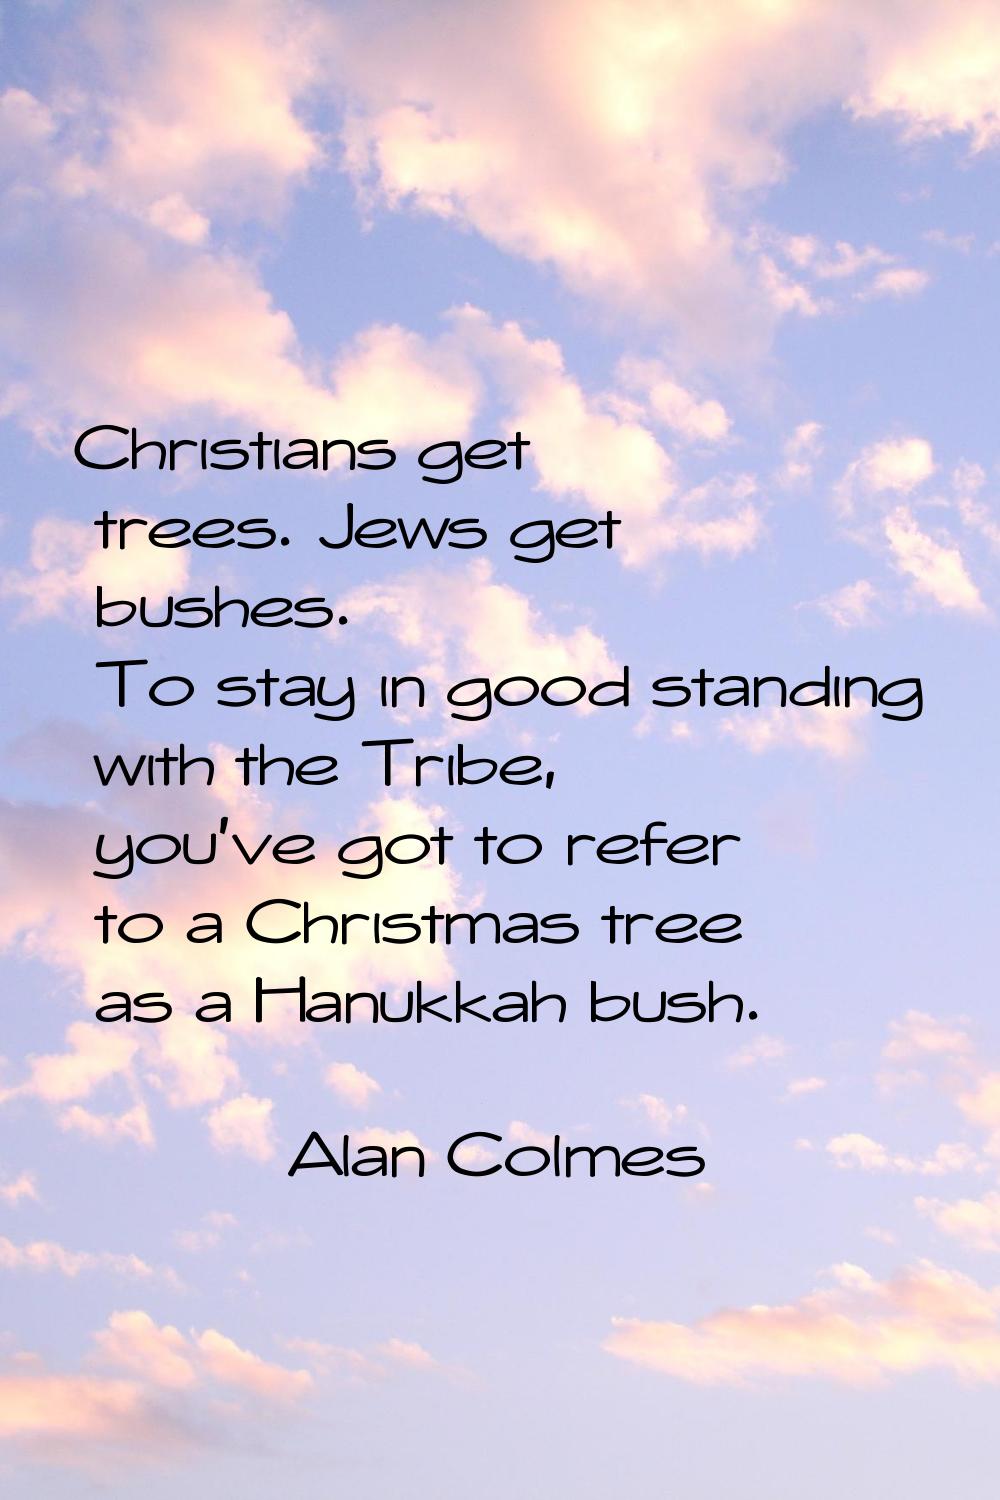 Christians get trees. Jews get bushes. To stay in good standing with the Tribe, you've got to refer